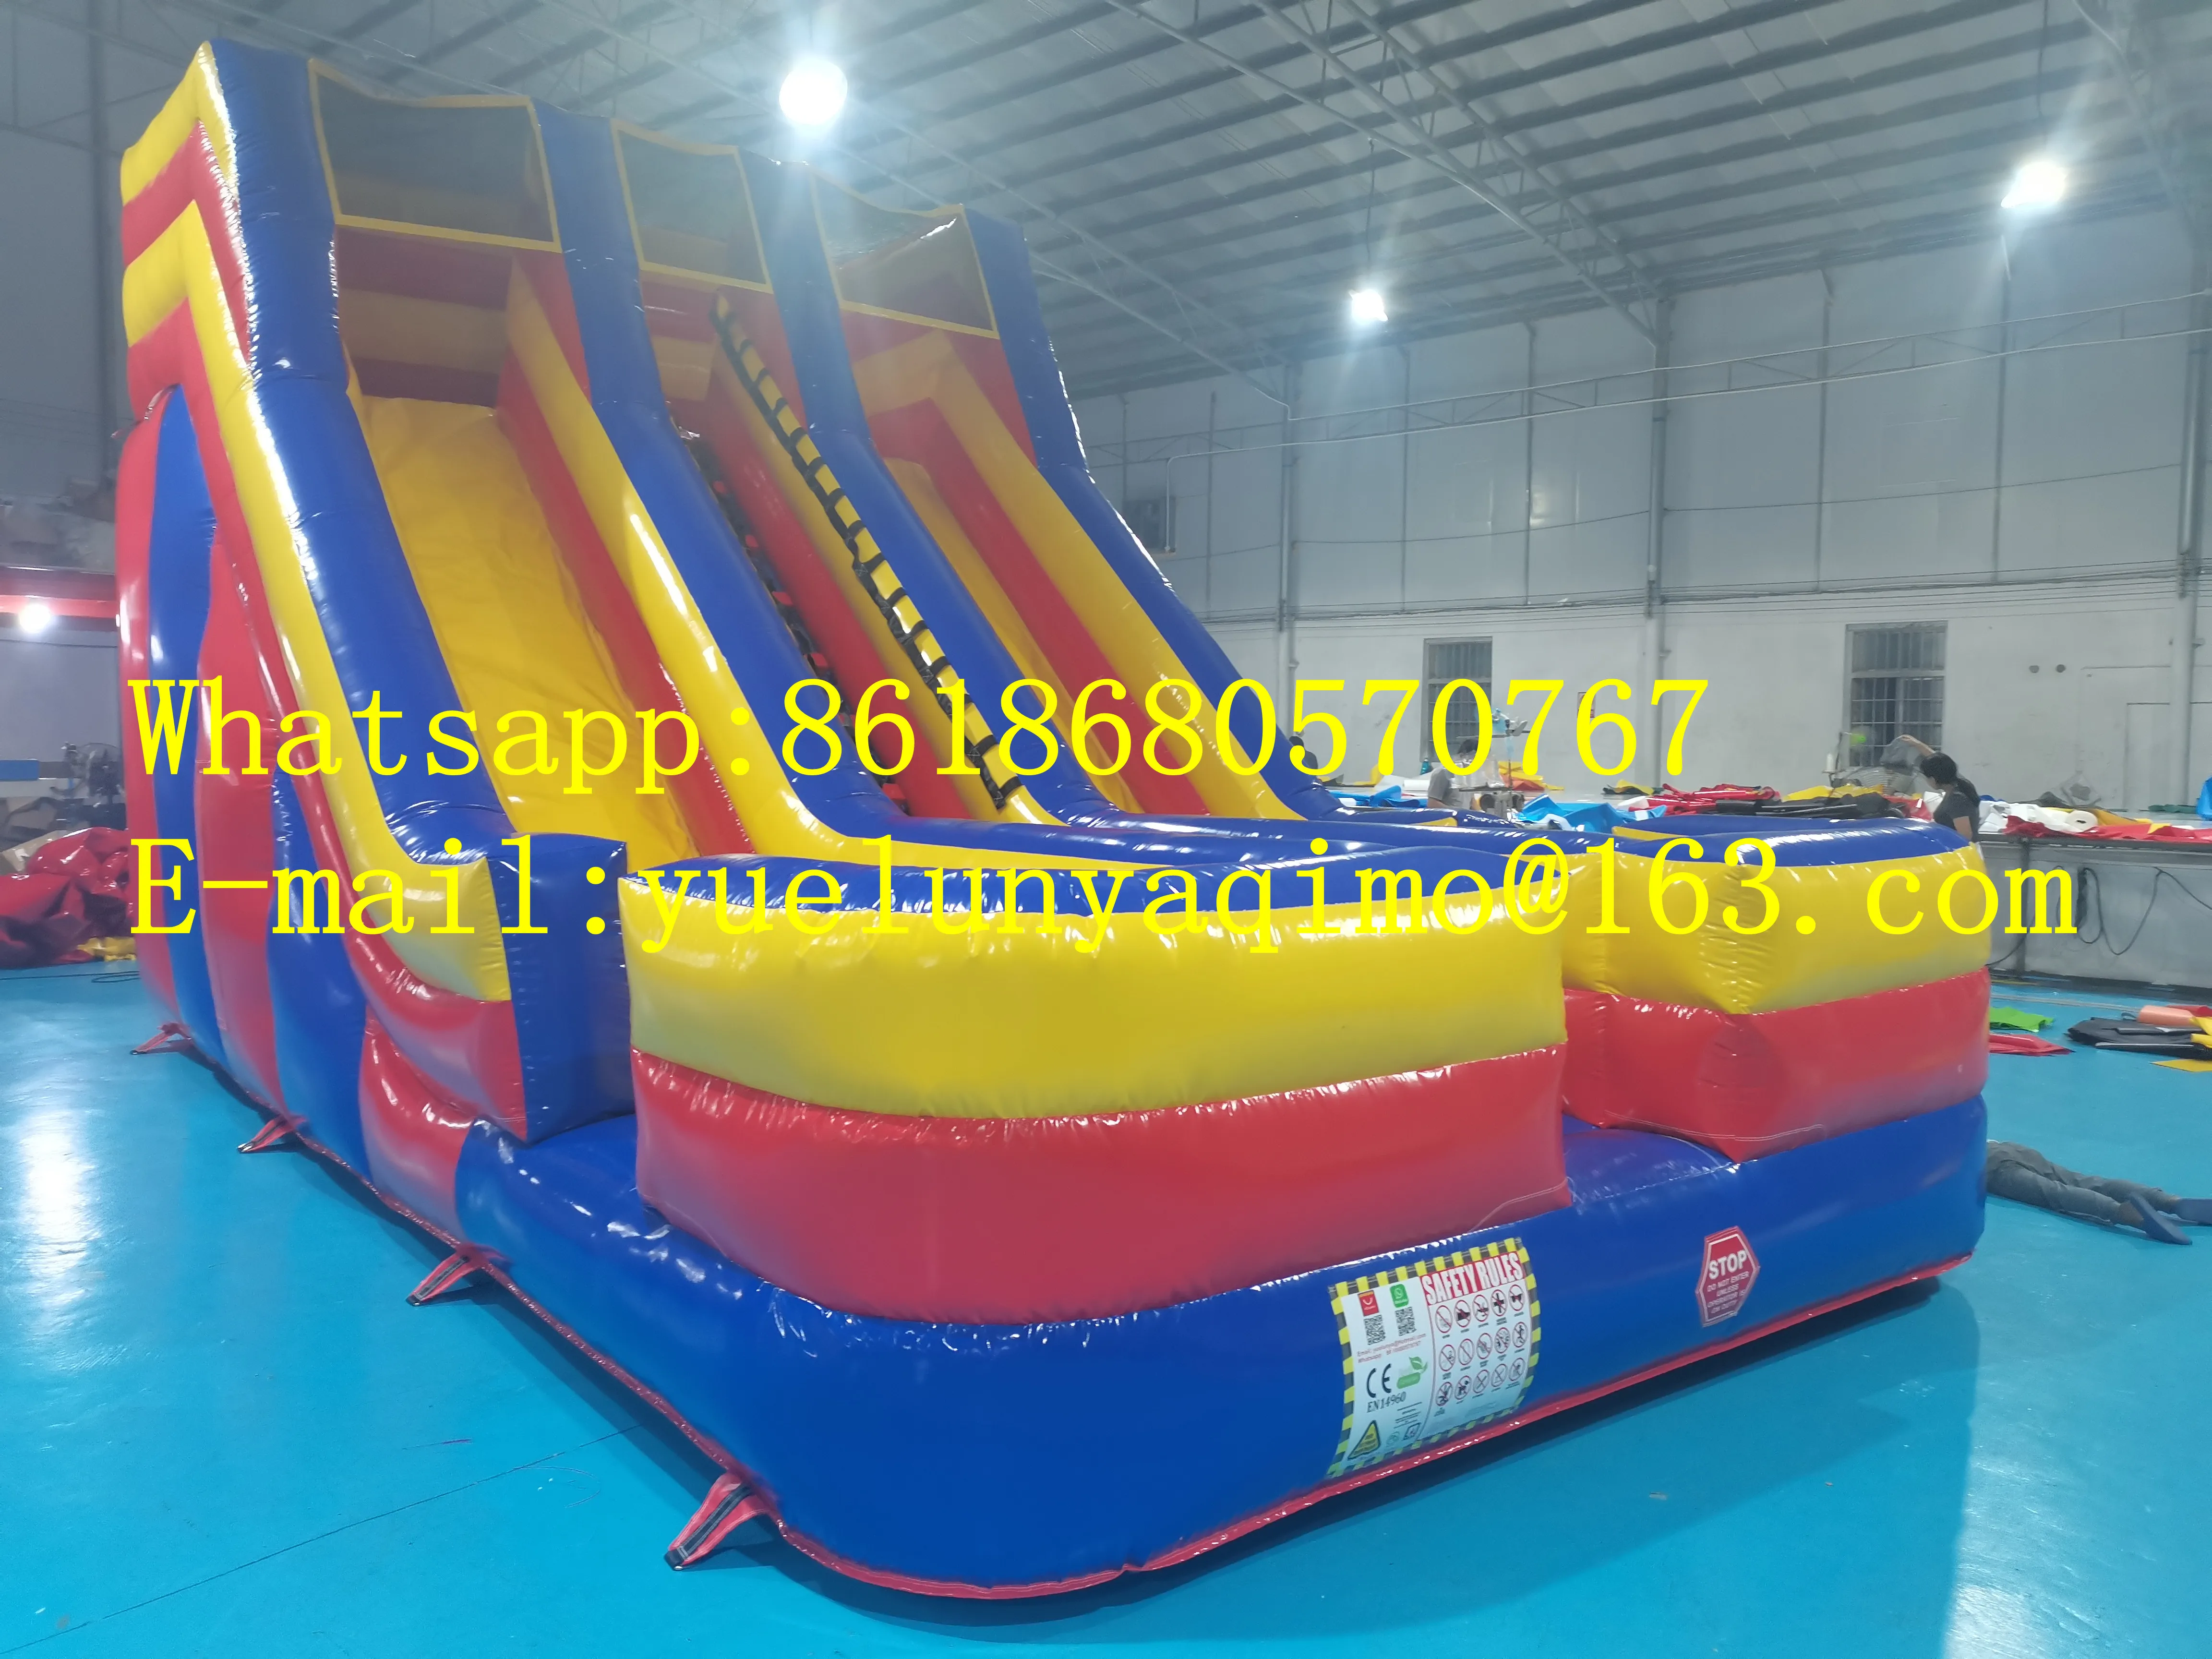 New outdoor large -scale color dual -lane inflatable slide slide combination